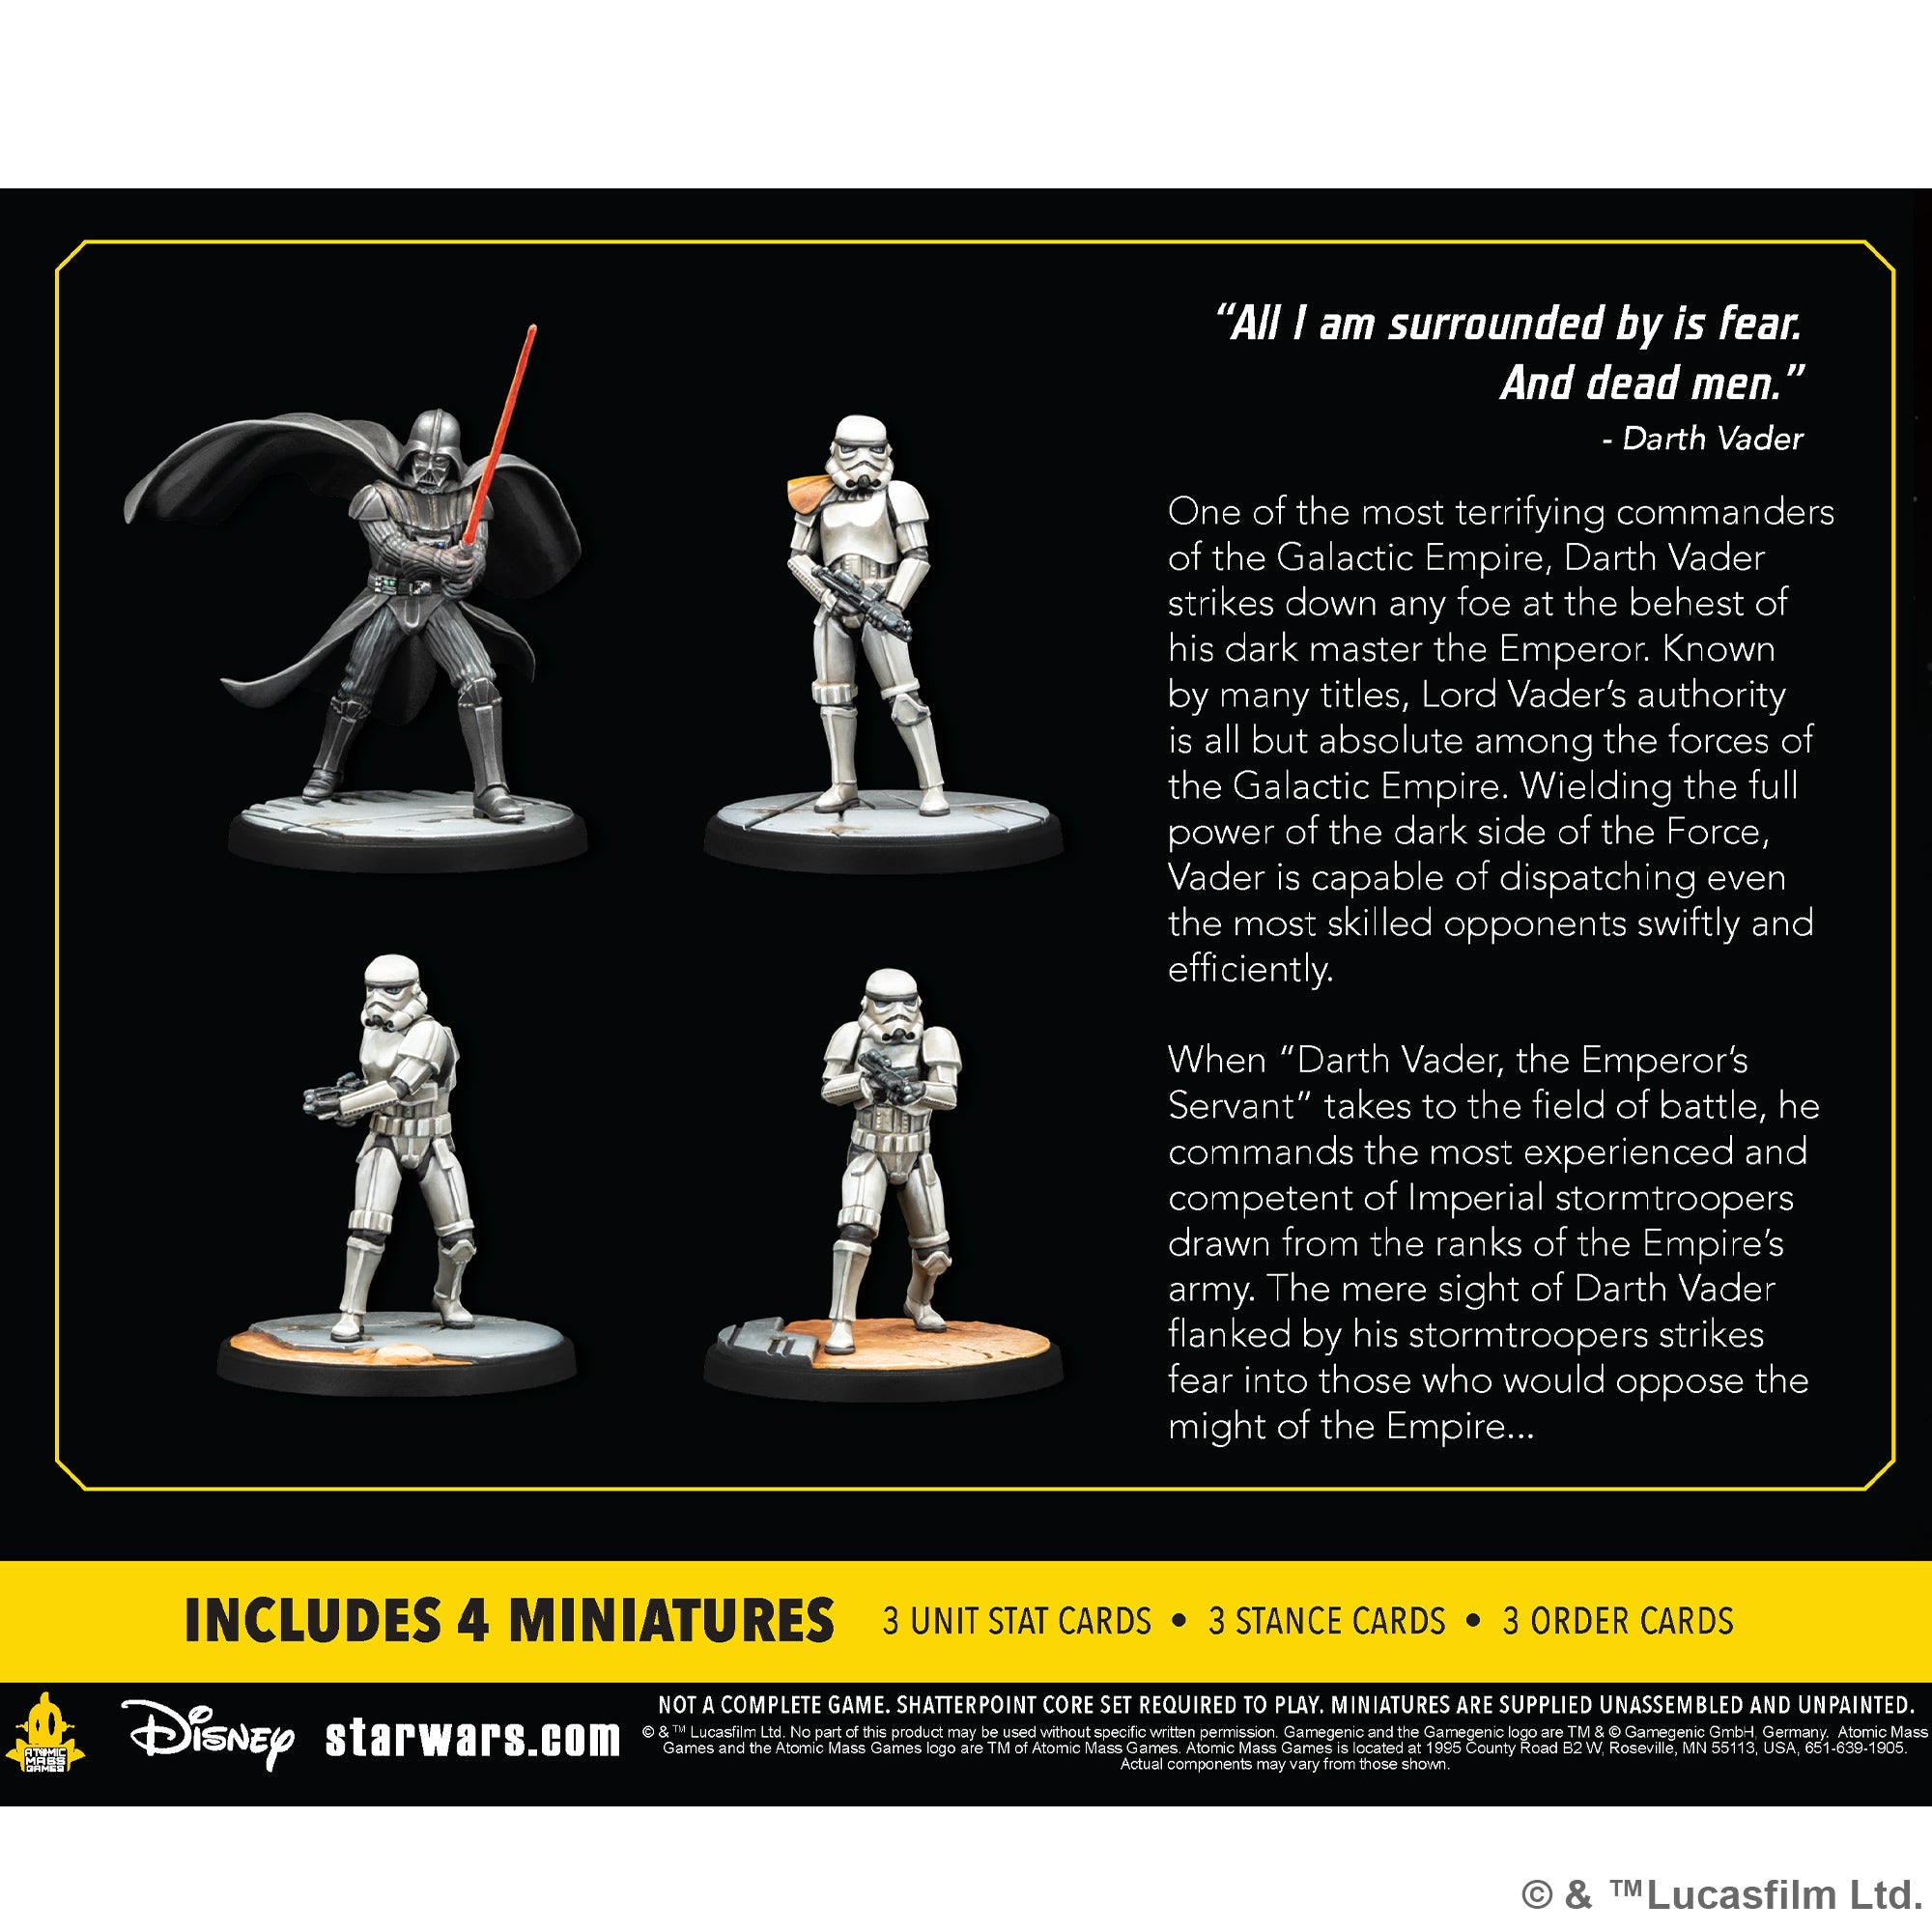 Star Wars: Shatterpoint: Fear and Dead Men, Darth Vader Squad Pack